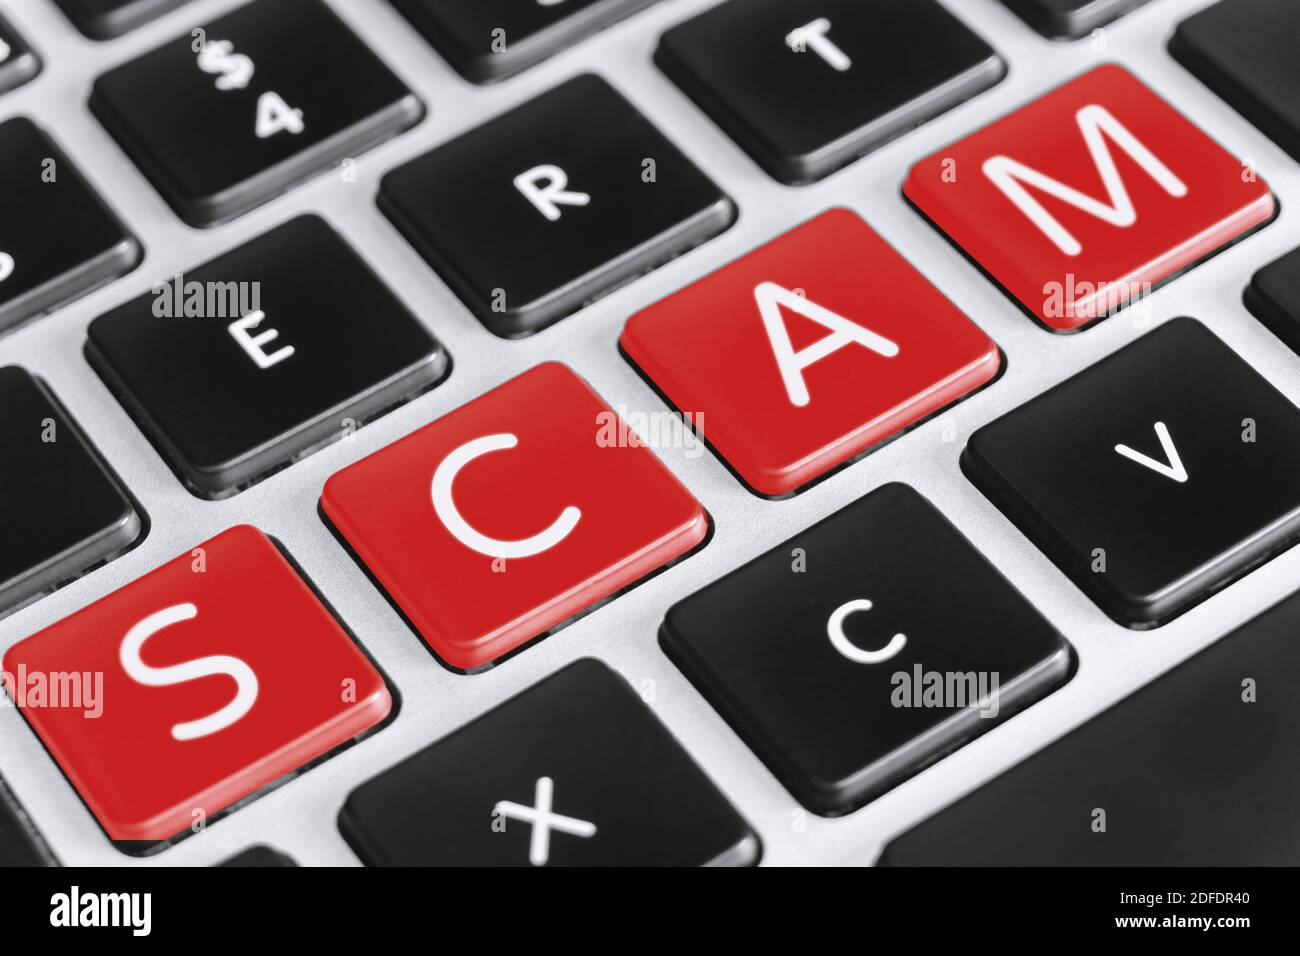 Internet and Online Frauds and Scams Concept. Scam Word on Computer Keyboard. Stock Photo